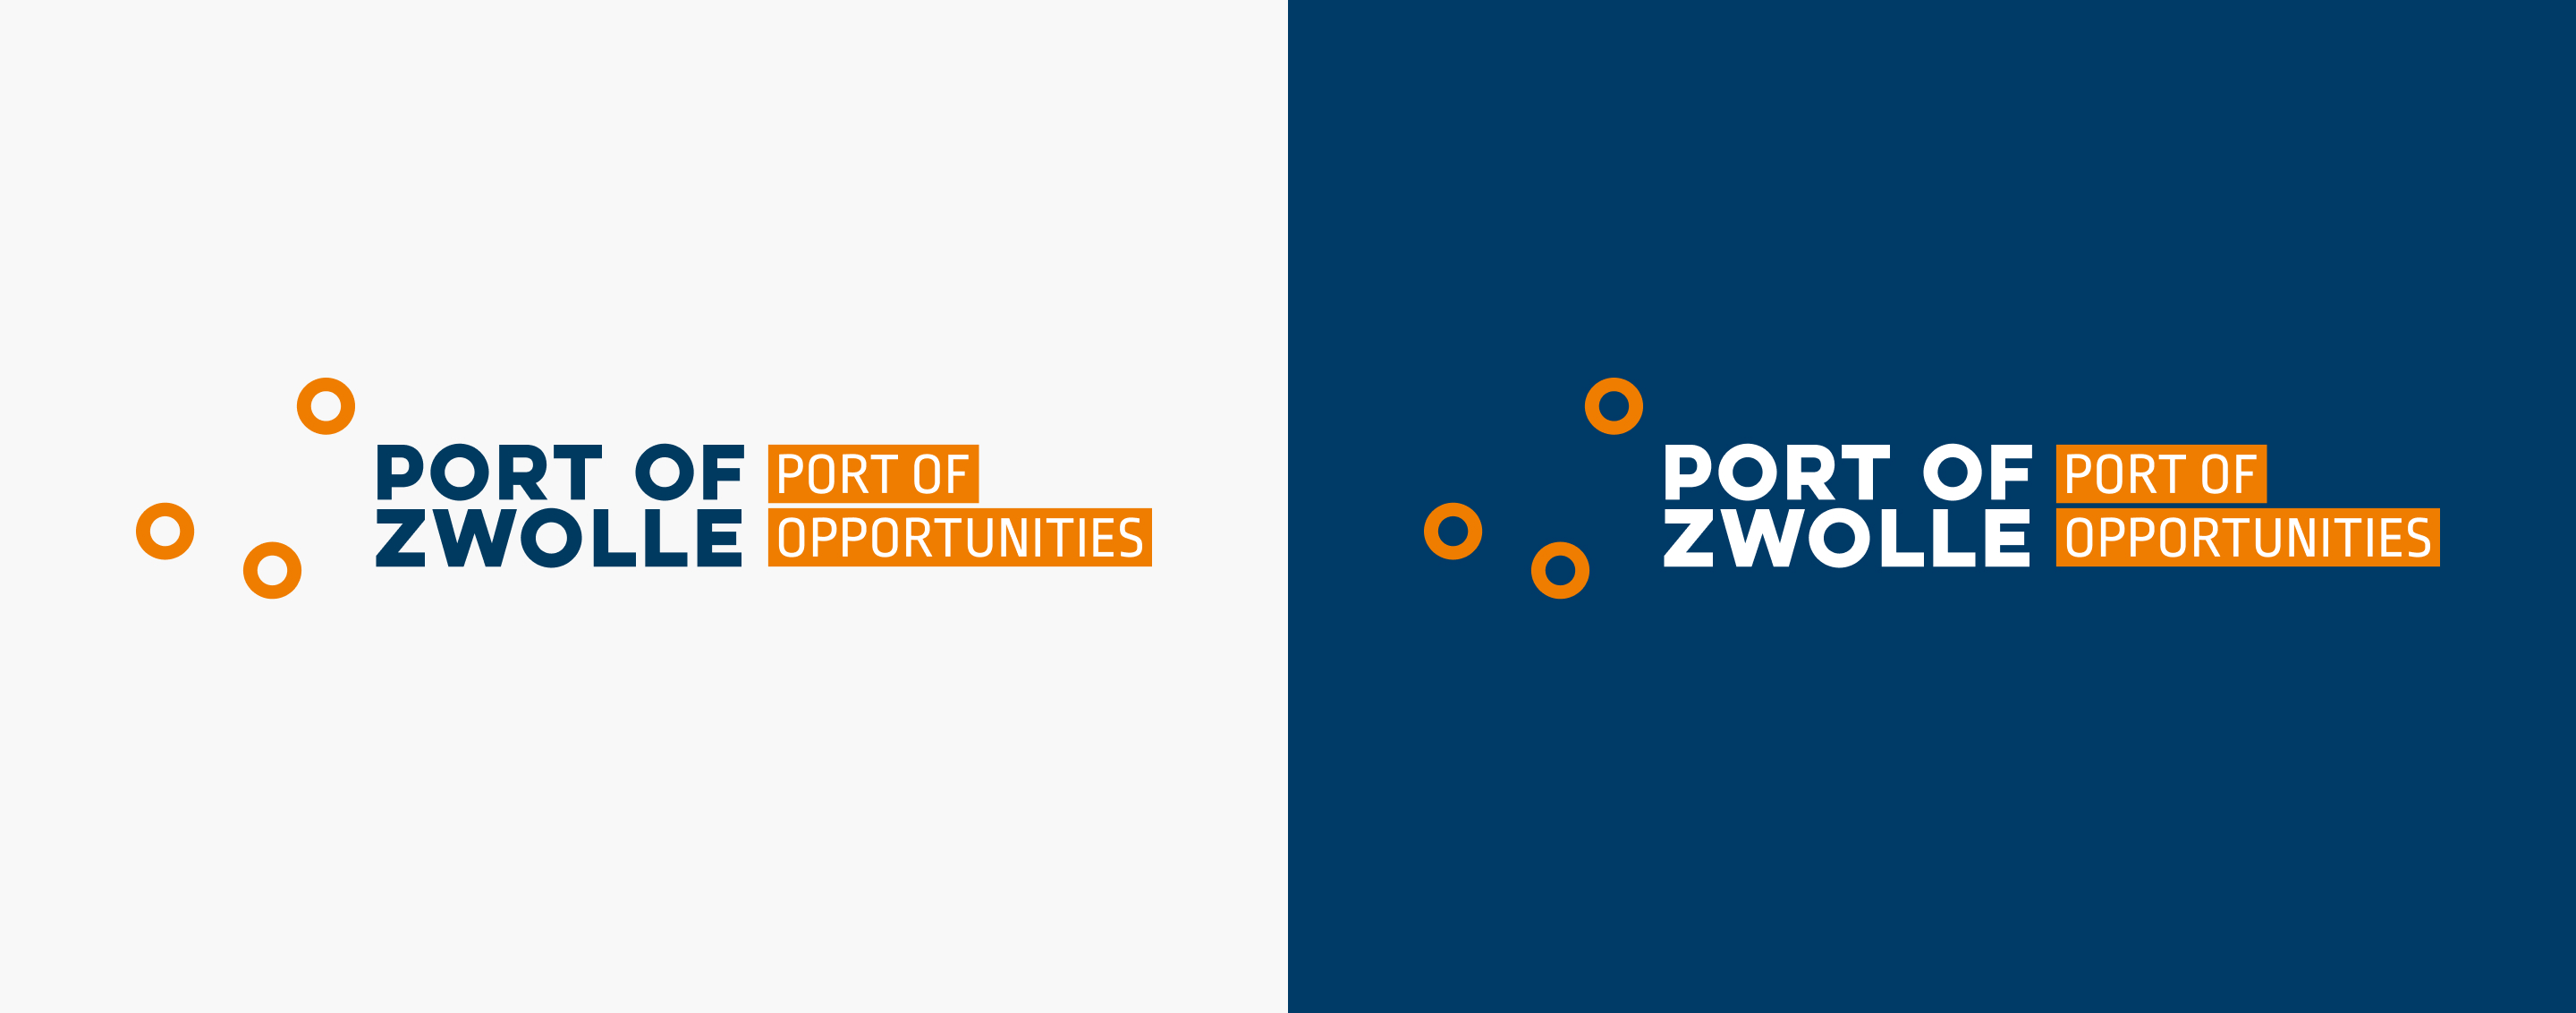 Port of Zwolle - Port of Opportunities